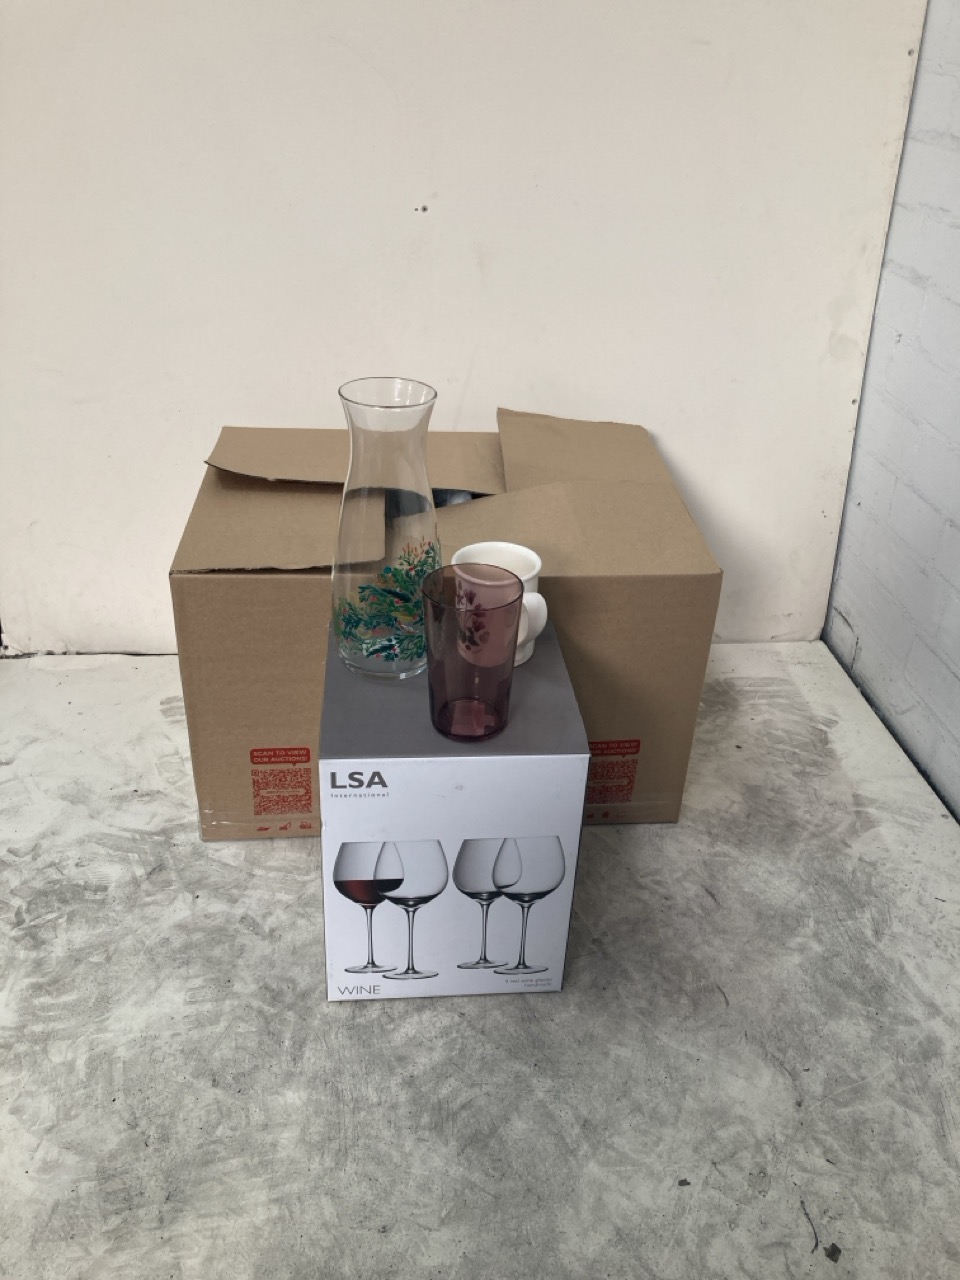 1 X BOX OF MIXED WINE GLASSES,CUPS,GLASSES AND A GLASS VASE